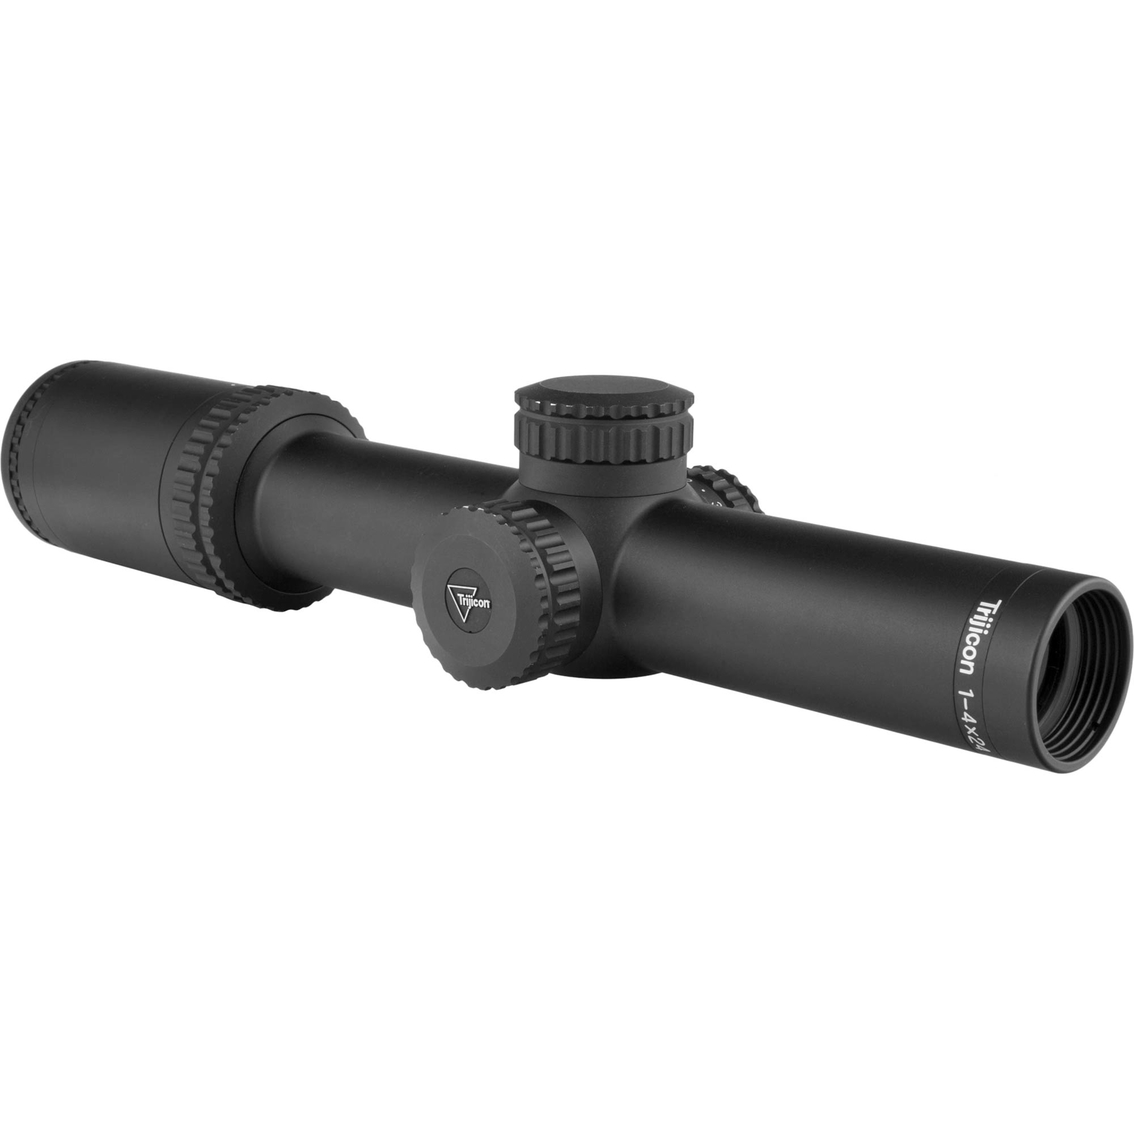 Trijicon AccuPower 1-4x24 SG-C/D Red Riflescope - Image 4 of 4